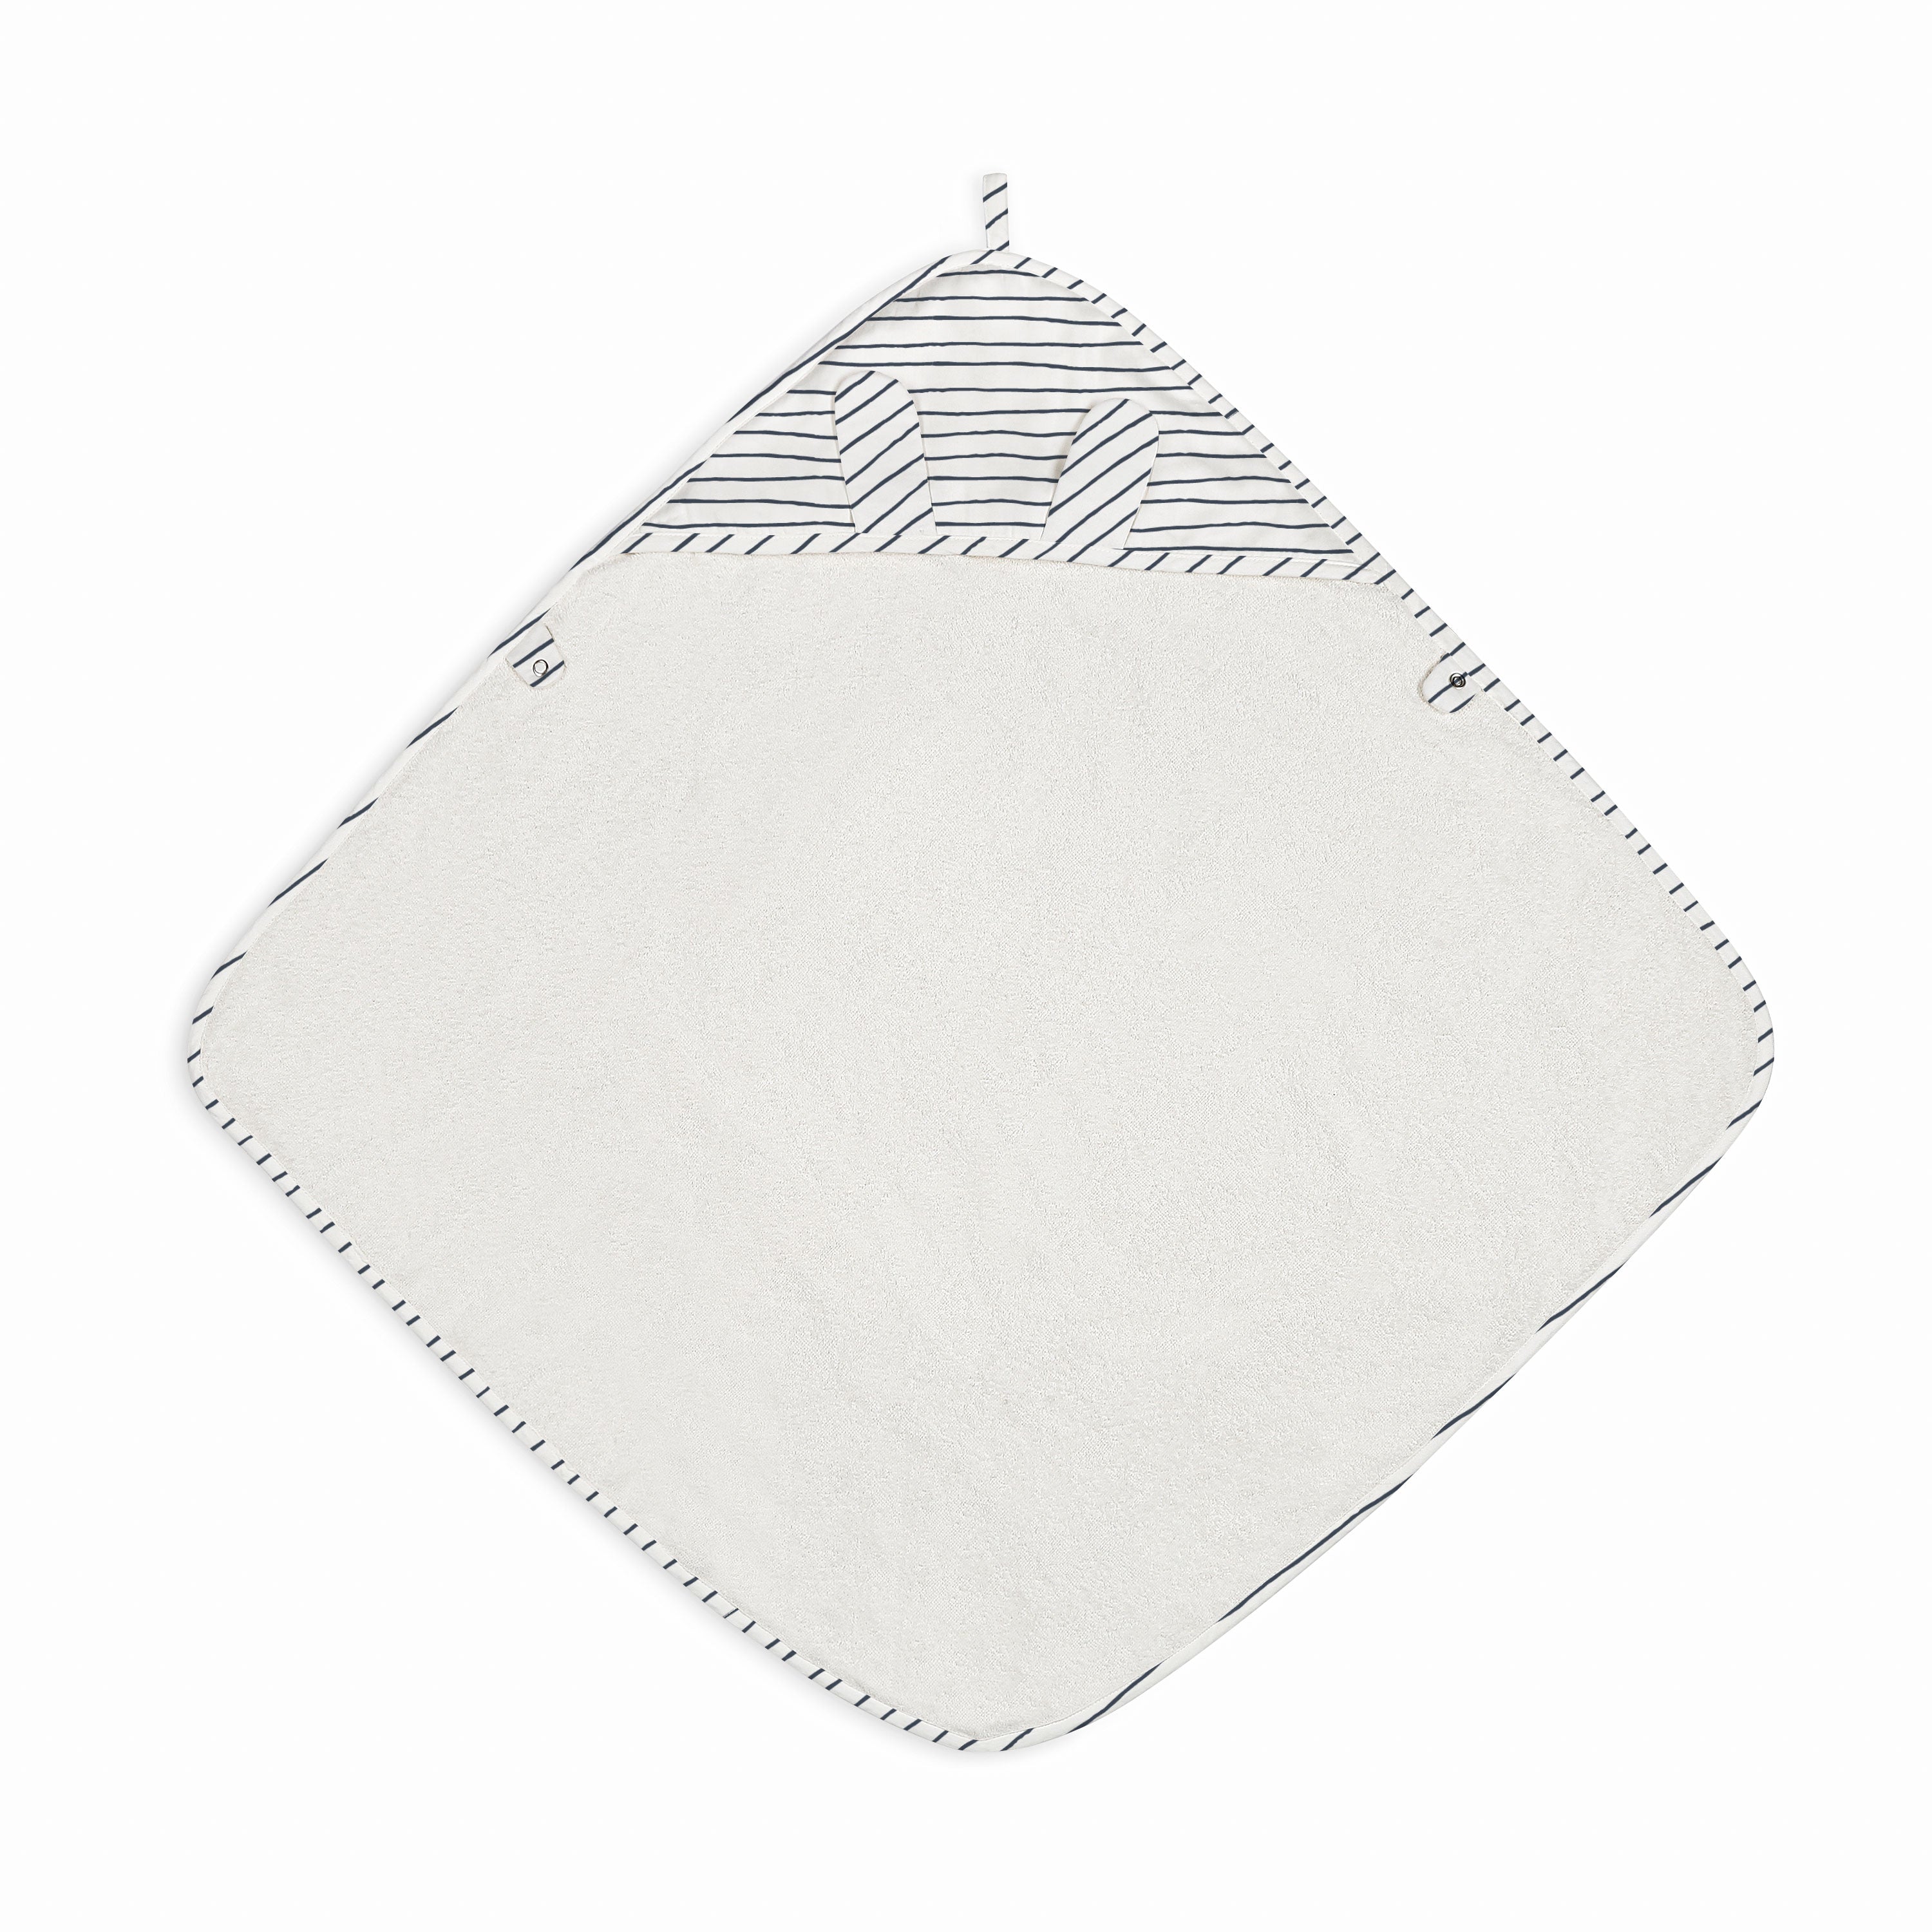 A Makemake Organics Organic Cotton Hooded Baby Towel & Poncho in Navy Stripes with a white, plush surface and black stitched edges, featuring a patterned black and white striped corner with a loop. The background is solid white.